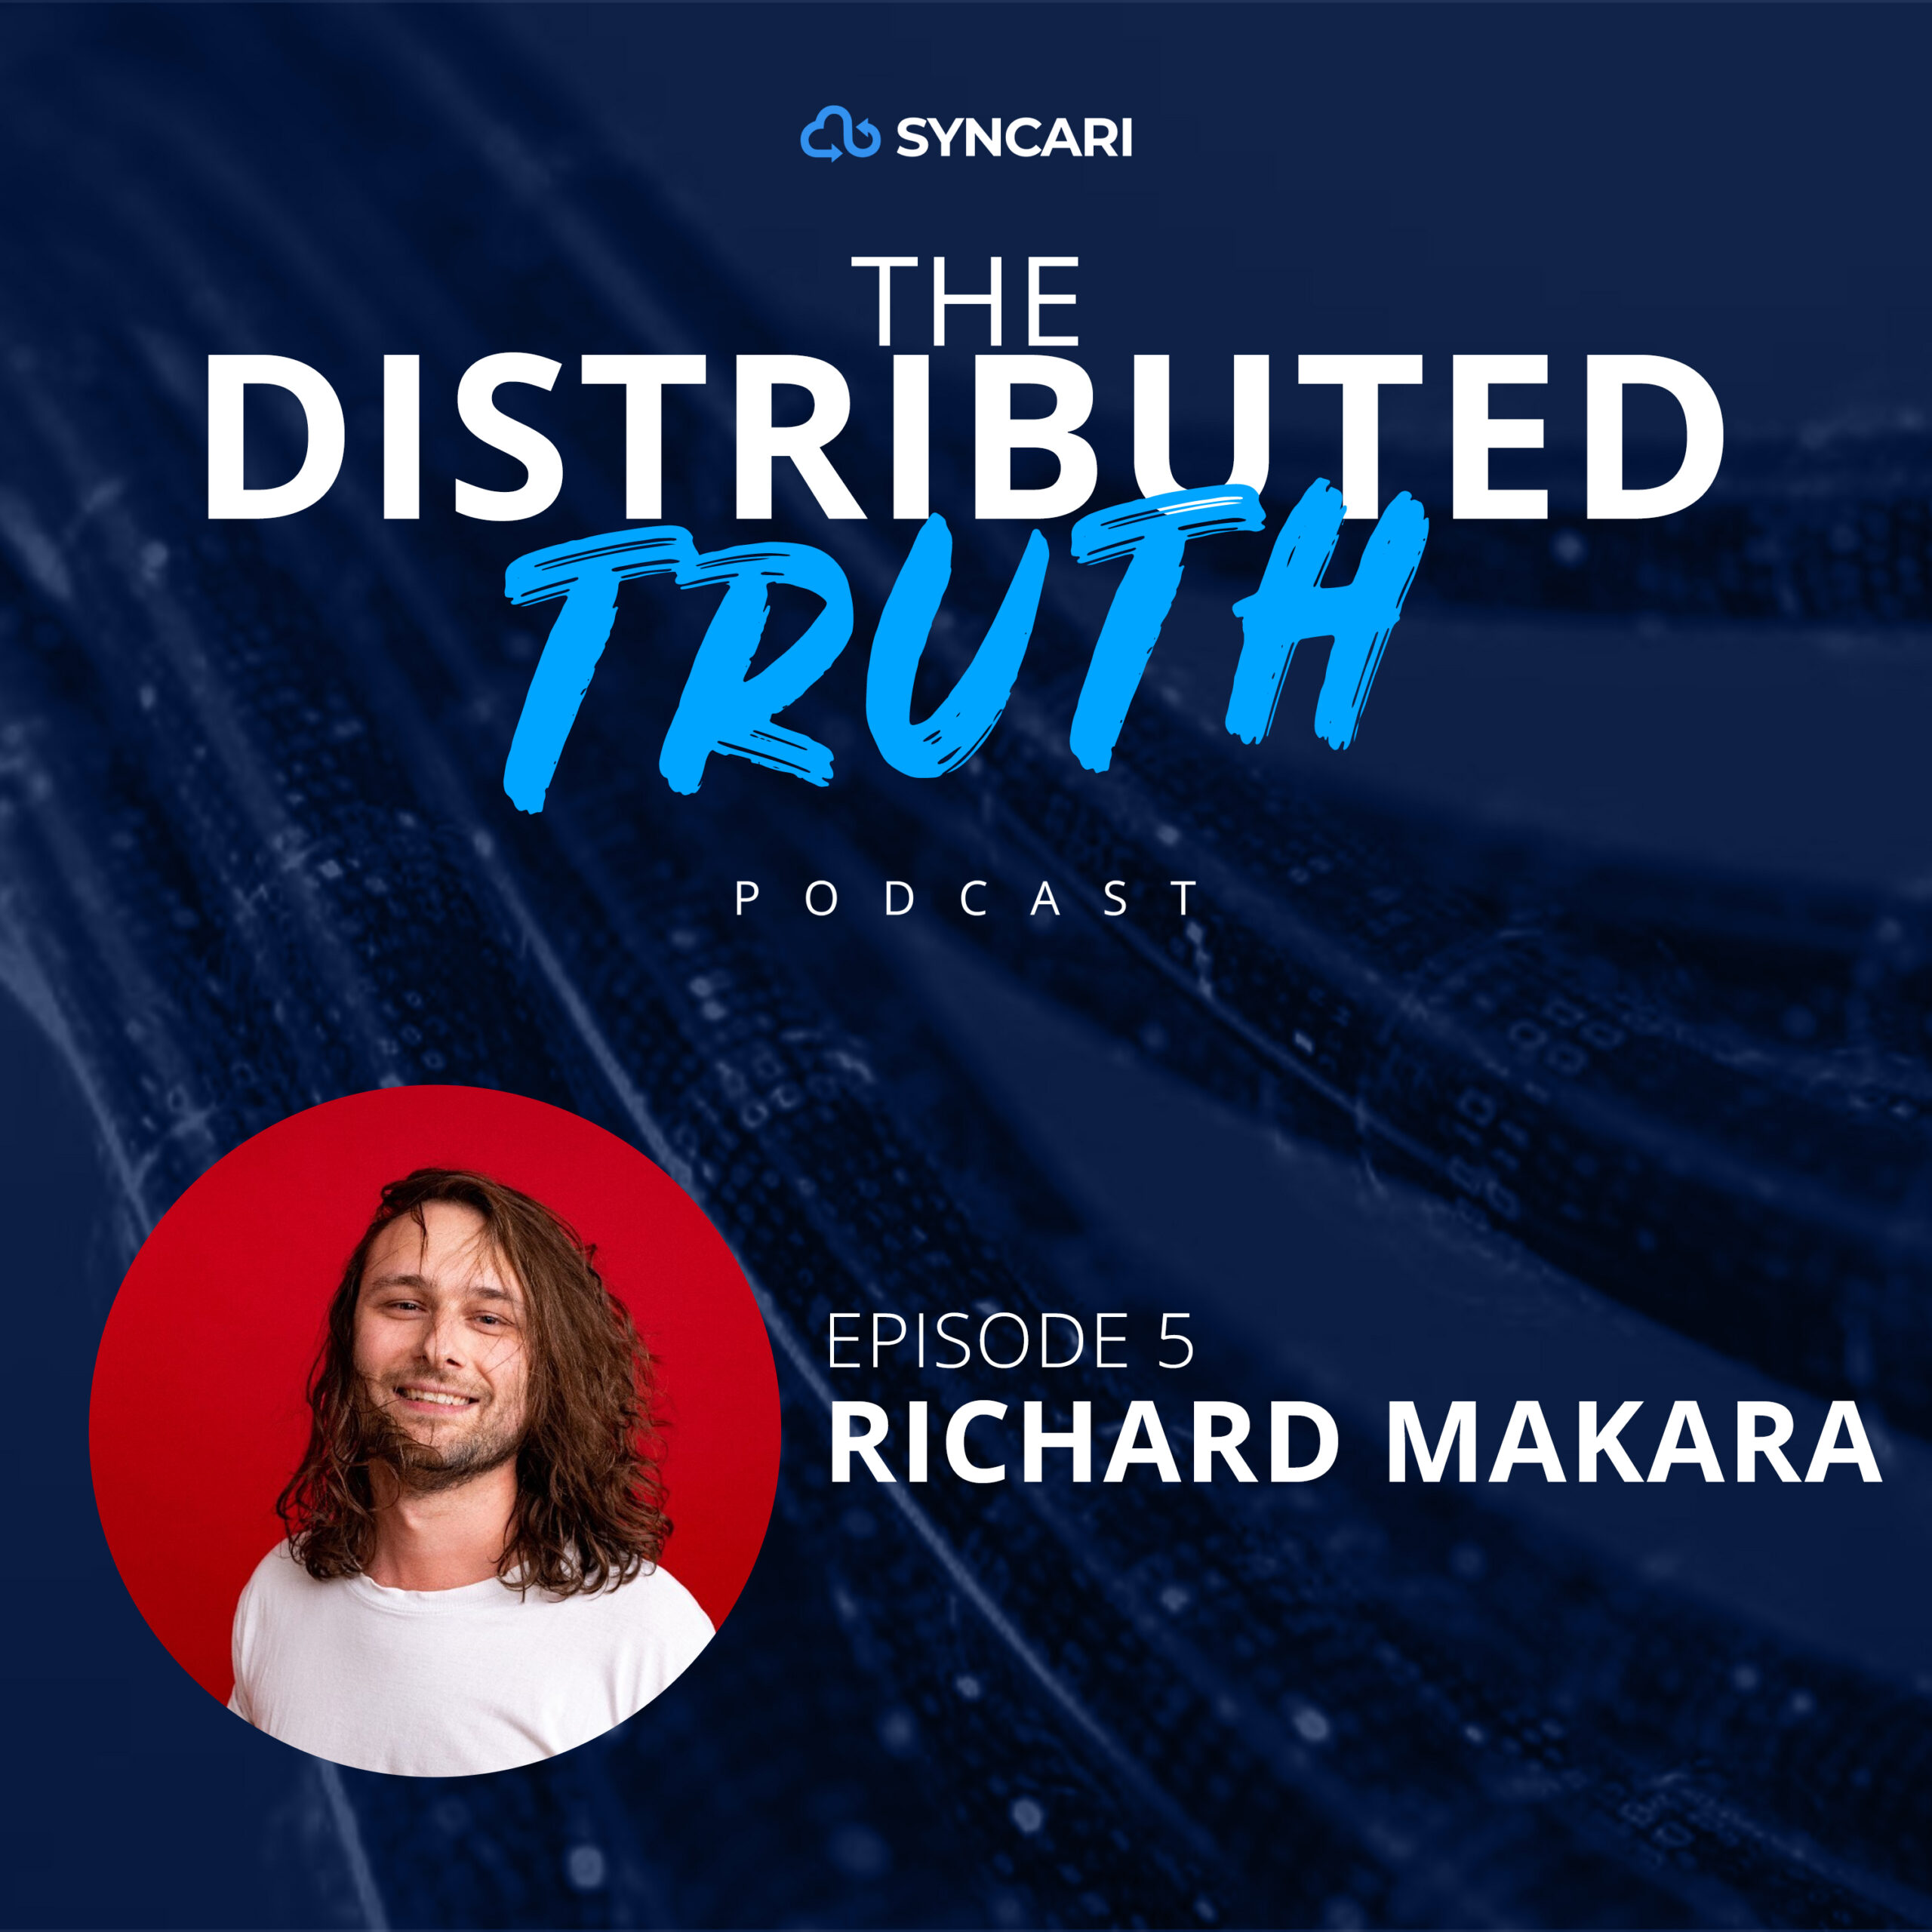 Richard Makara on an episode of The Distributed Truth